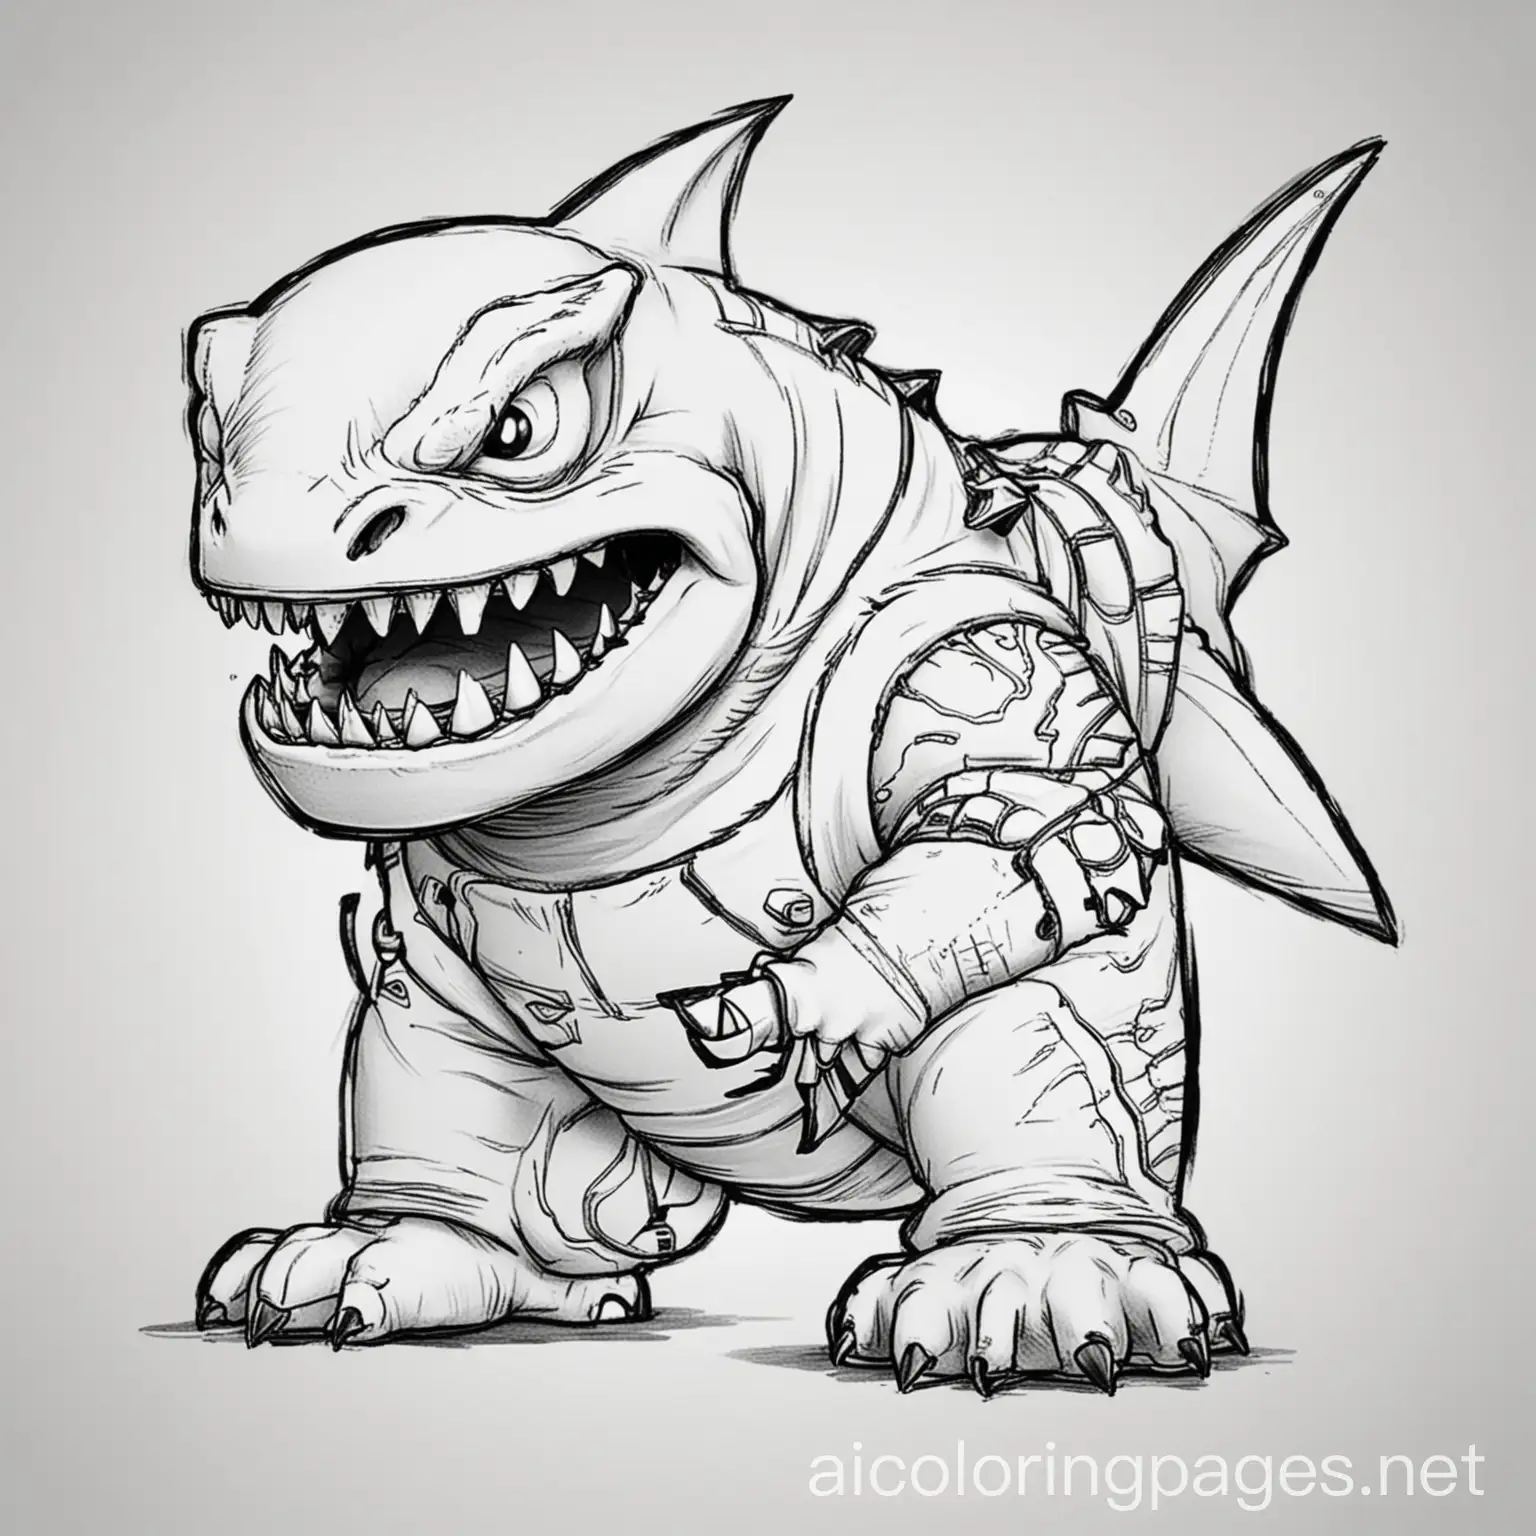 street sharks toy easy coloring
, Coloring Page, black and white, line art, white background, Simplicity, Ample White Space. The background of the coloring page is plain white to make it easy for young children to color within the lines. The outlines of all the subjects are easy to distinguish, making it simple for kids to color without too much difficulty